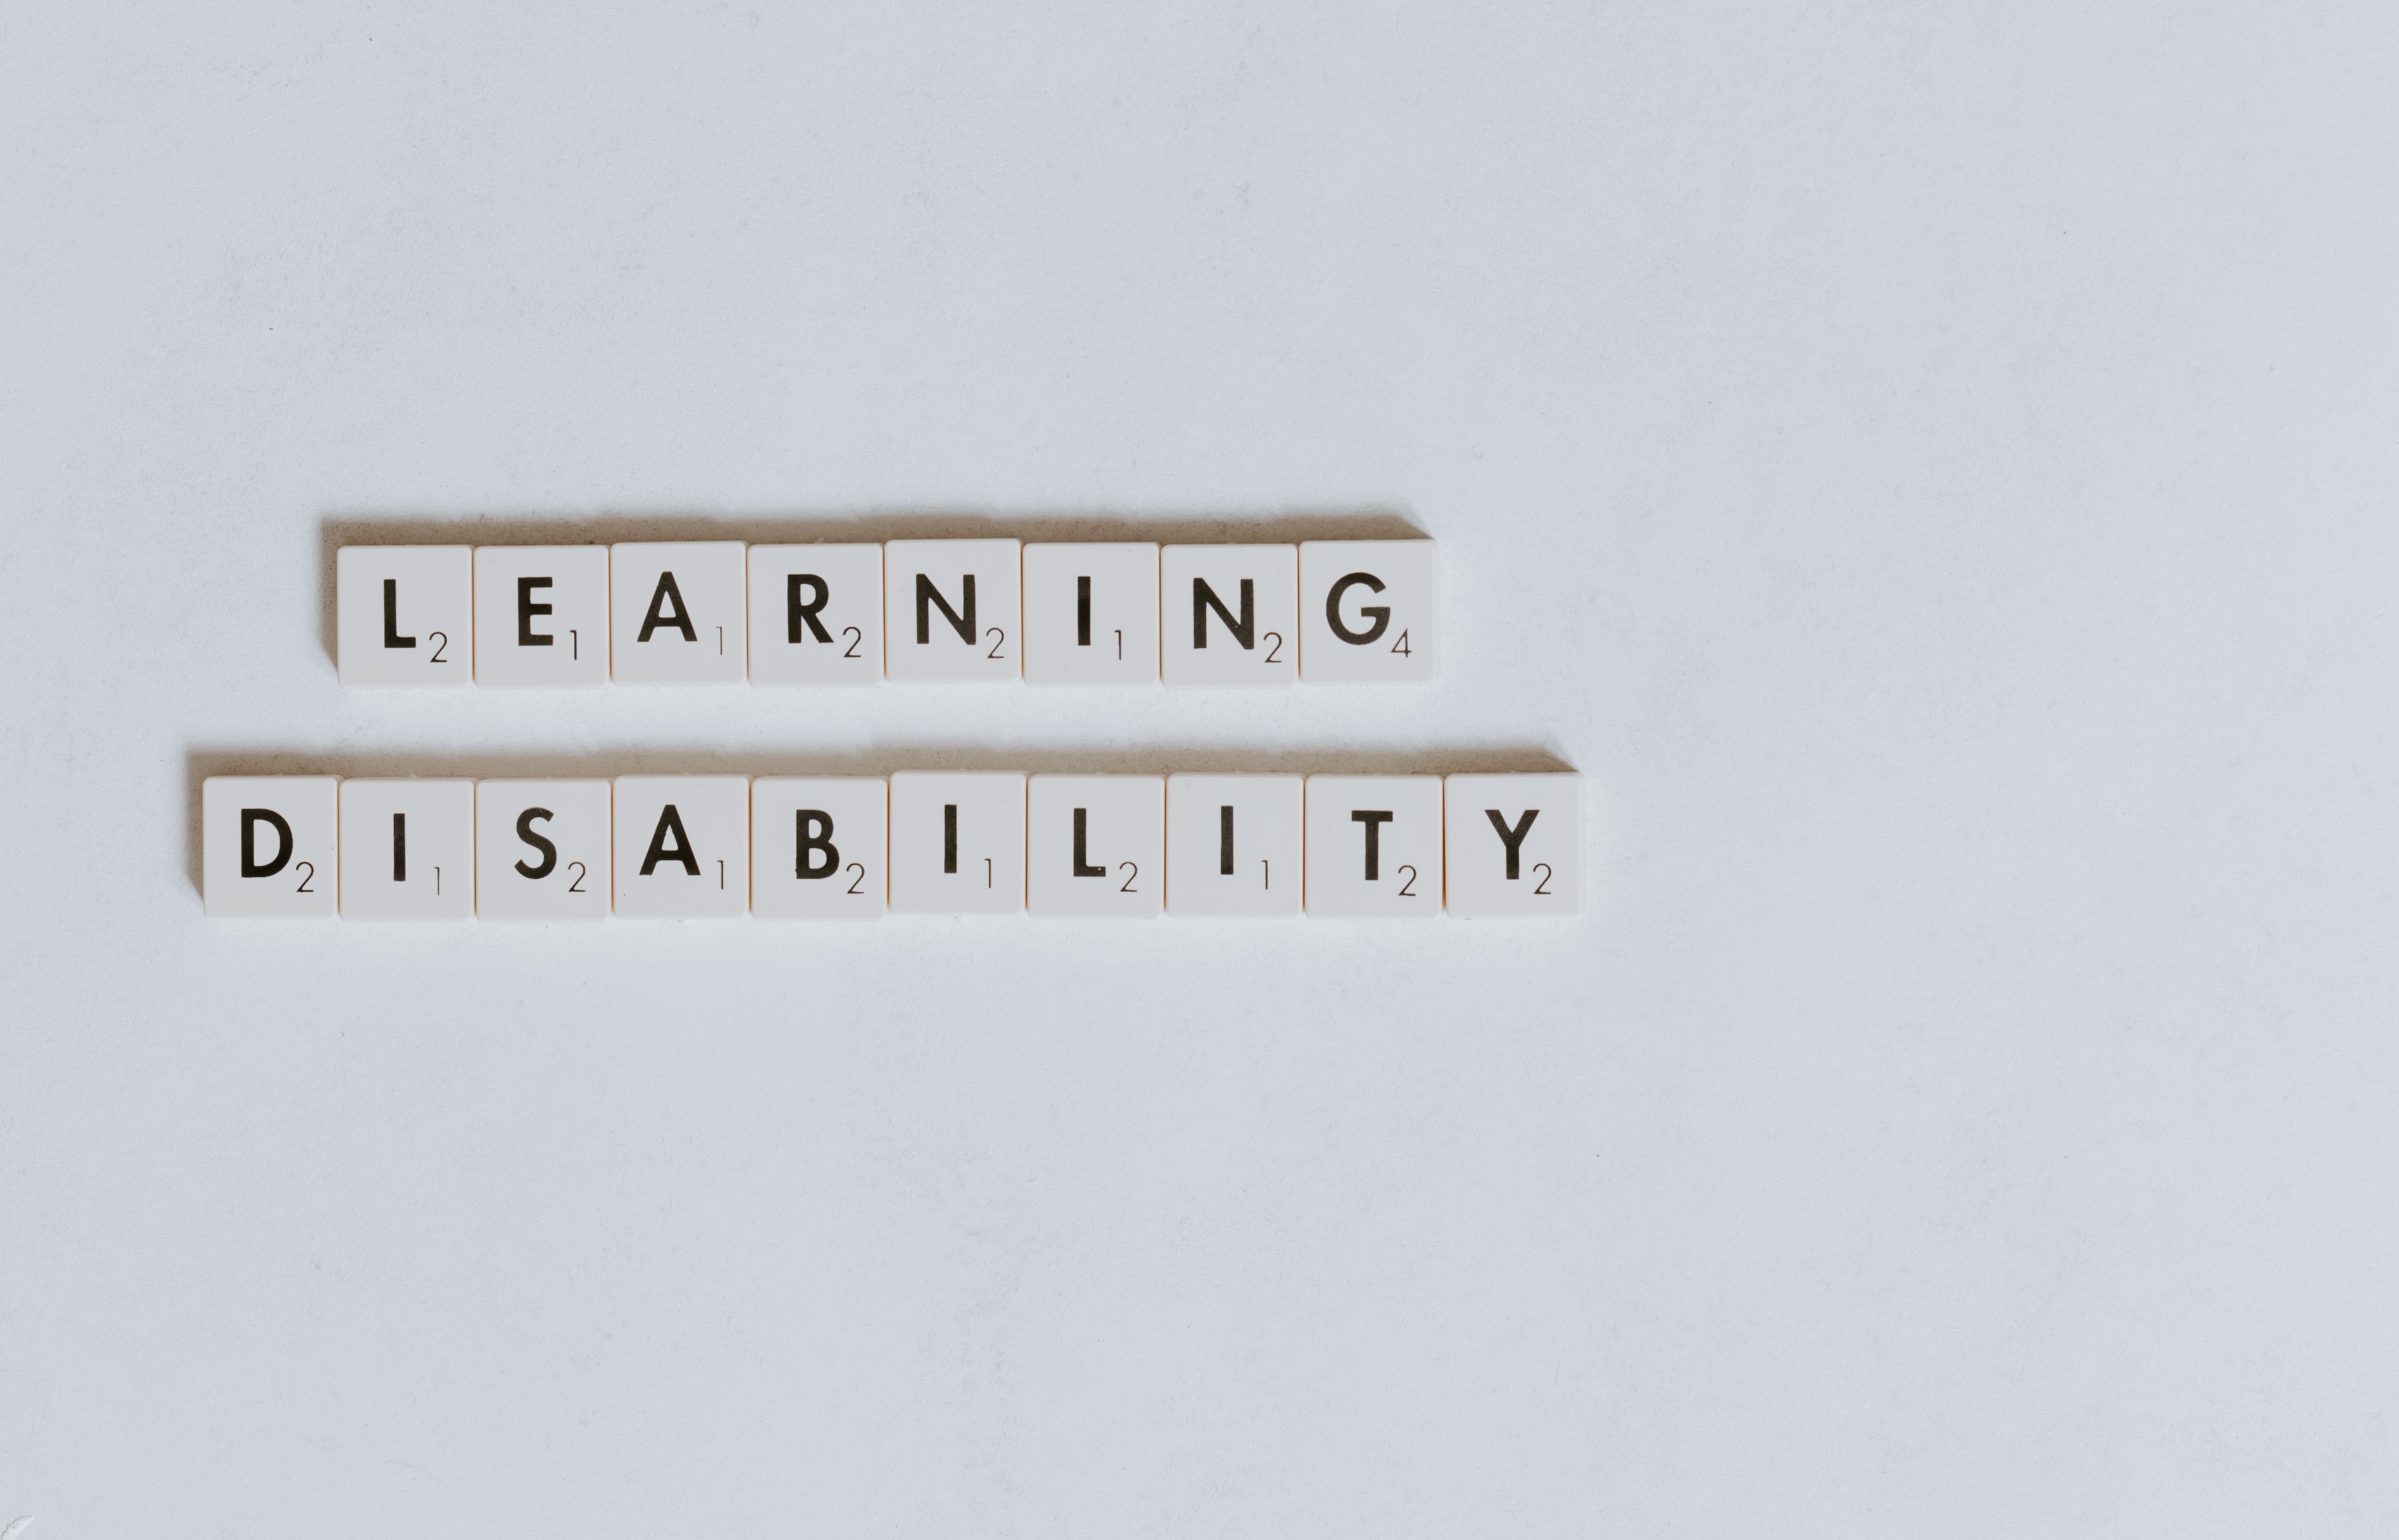 Can I Pursue an Apprenticeship if I Have a Disability?